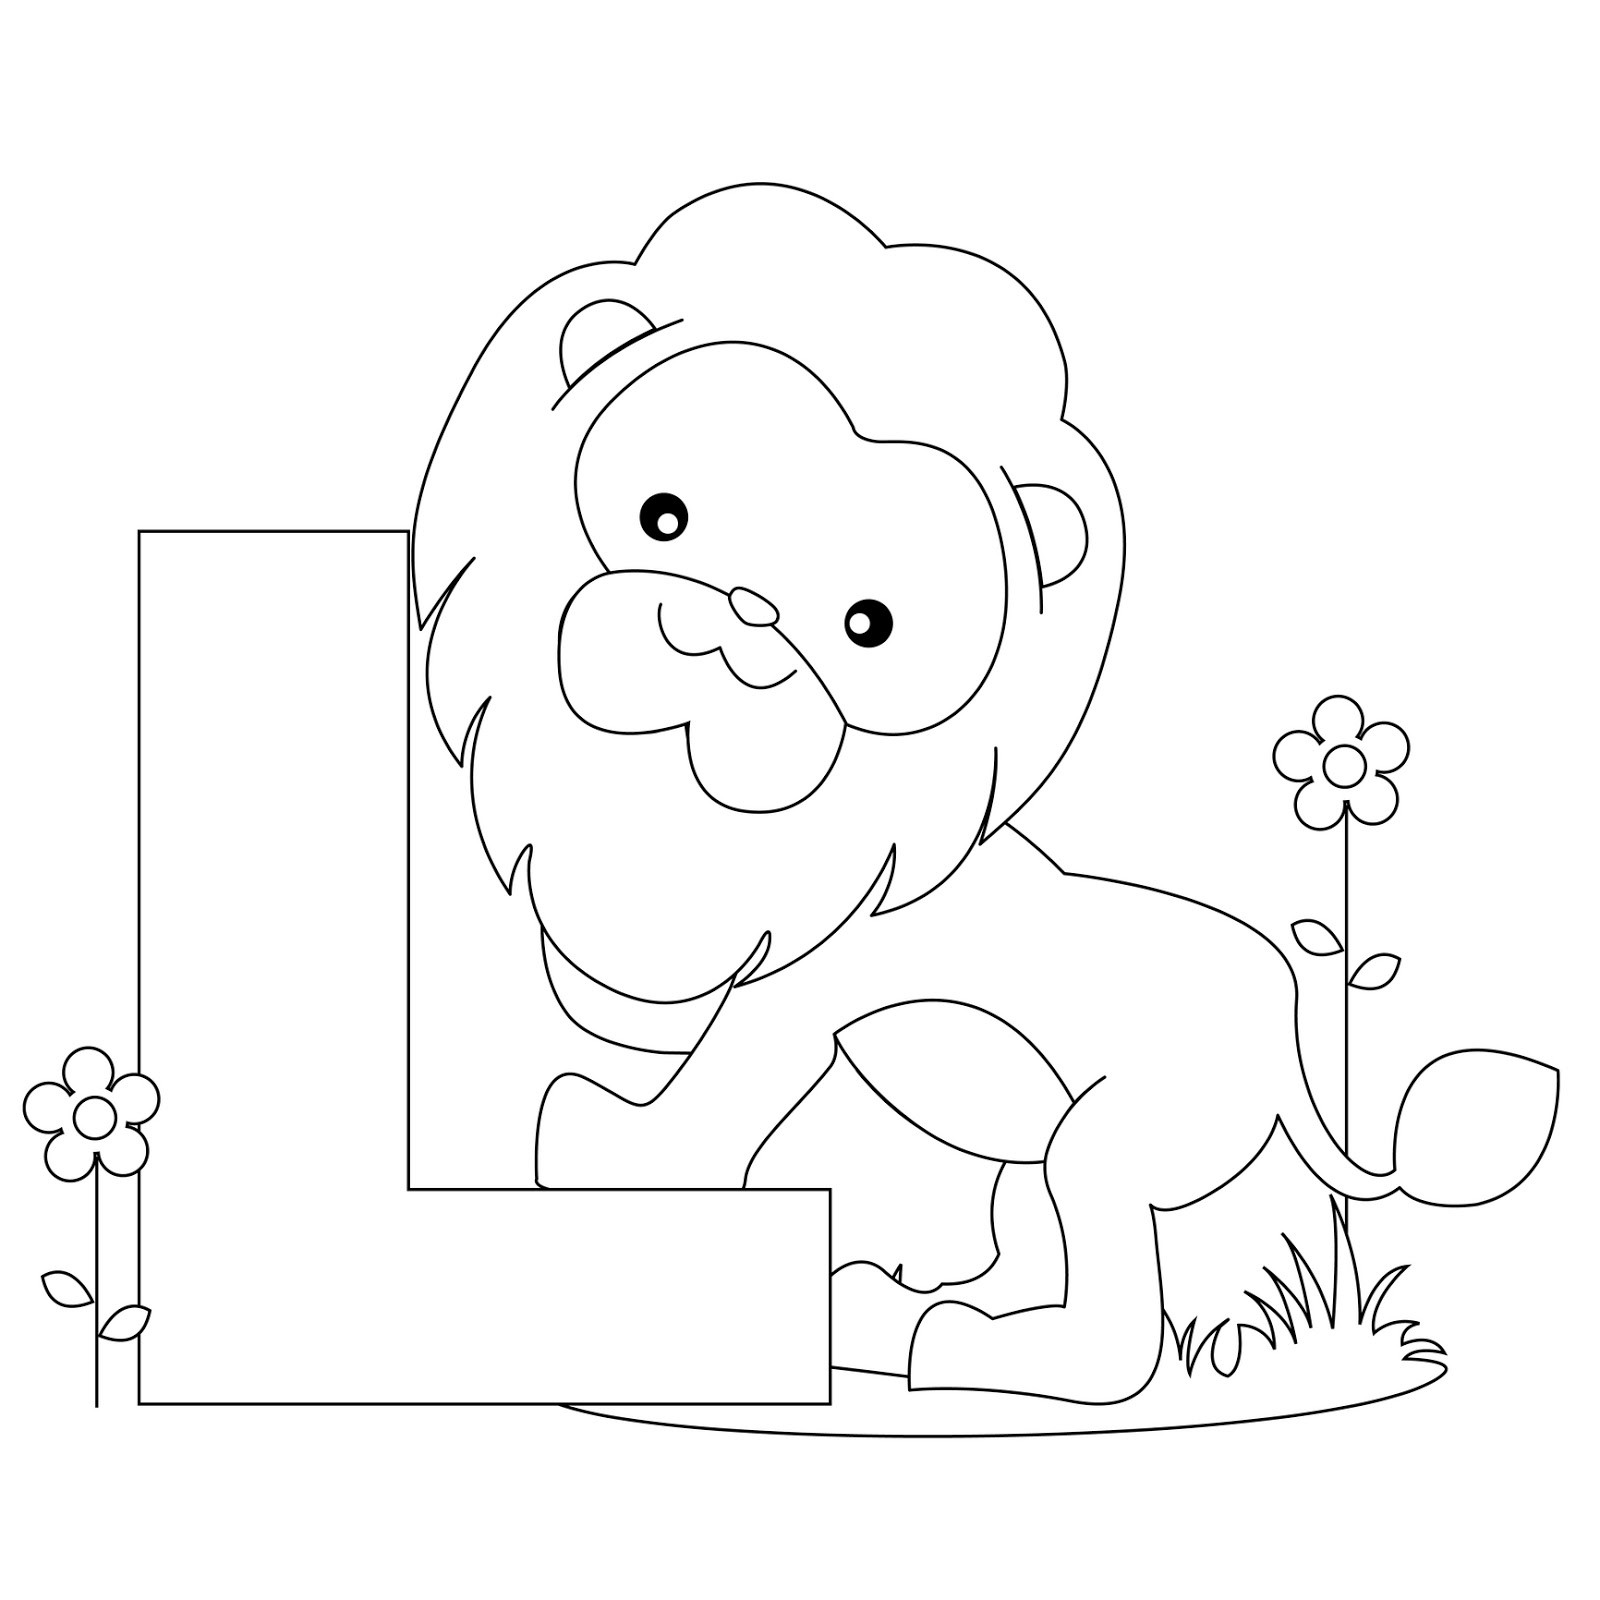 790 Cute Dltk Free Coloring Pages with disney character